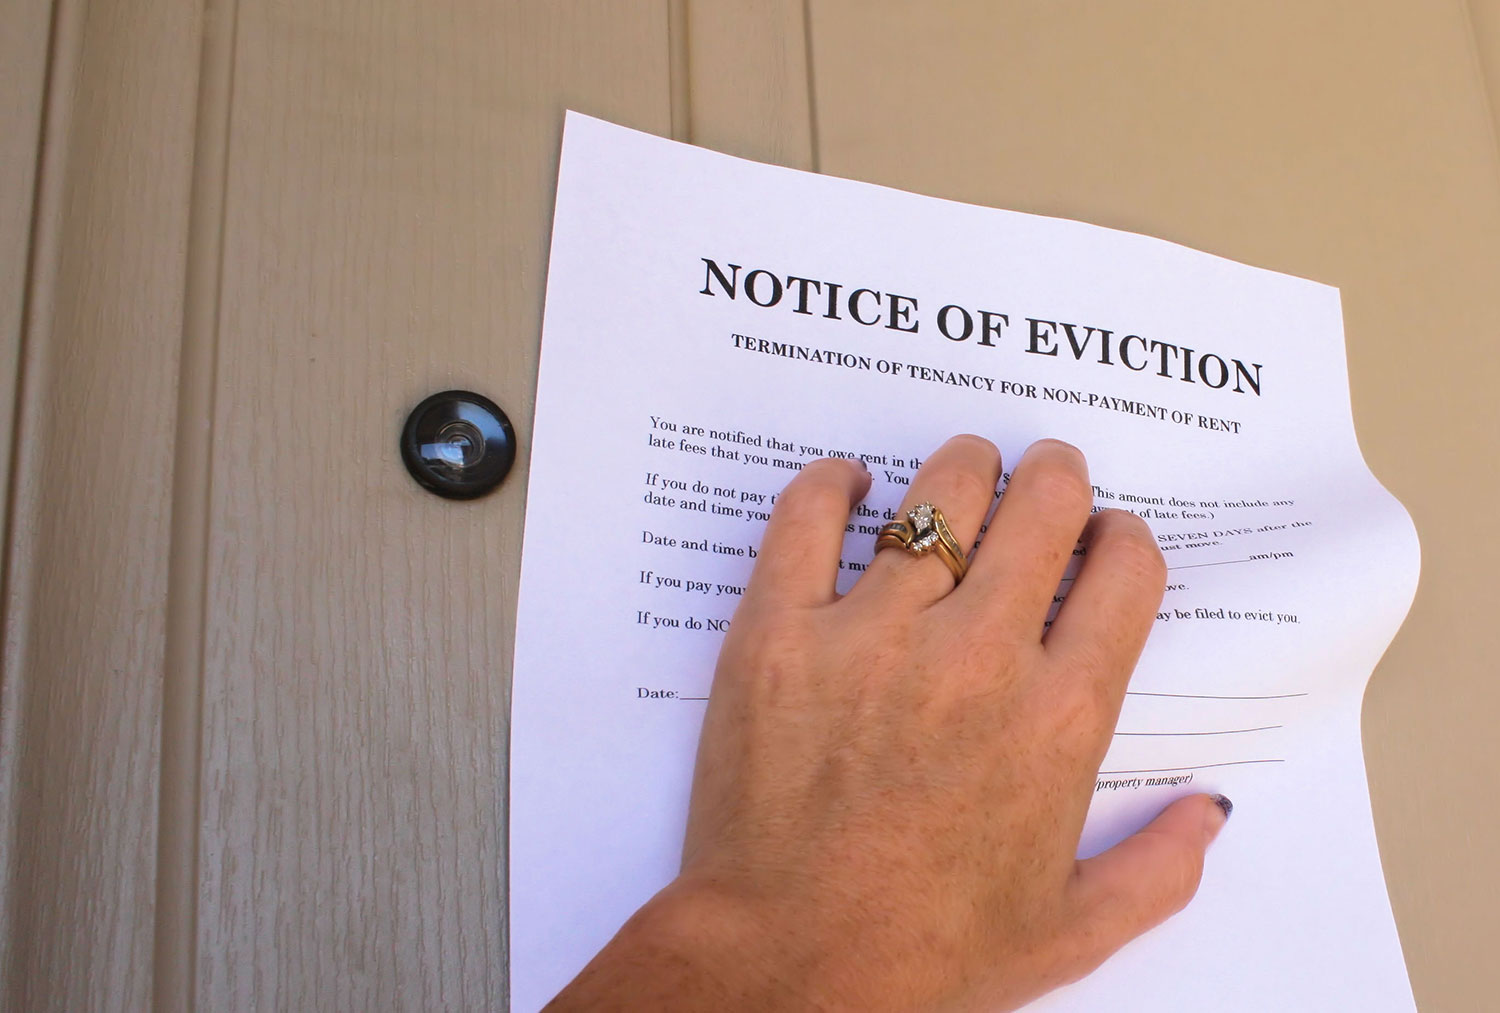 how-to-evict-a-tenant-without-a-rental-agreement-or-lease-new-jersey-eviction-law-glr-w